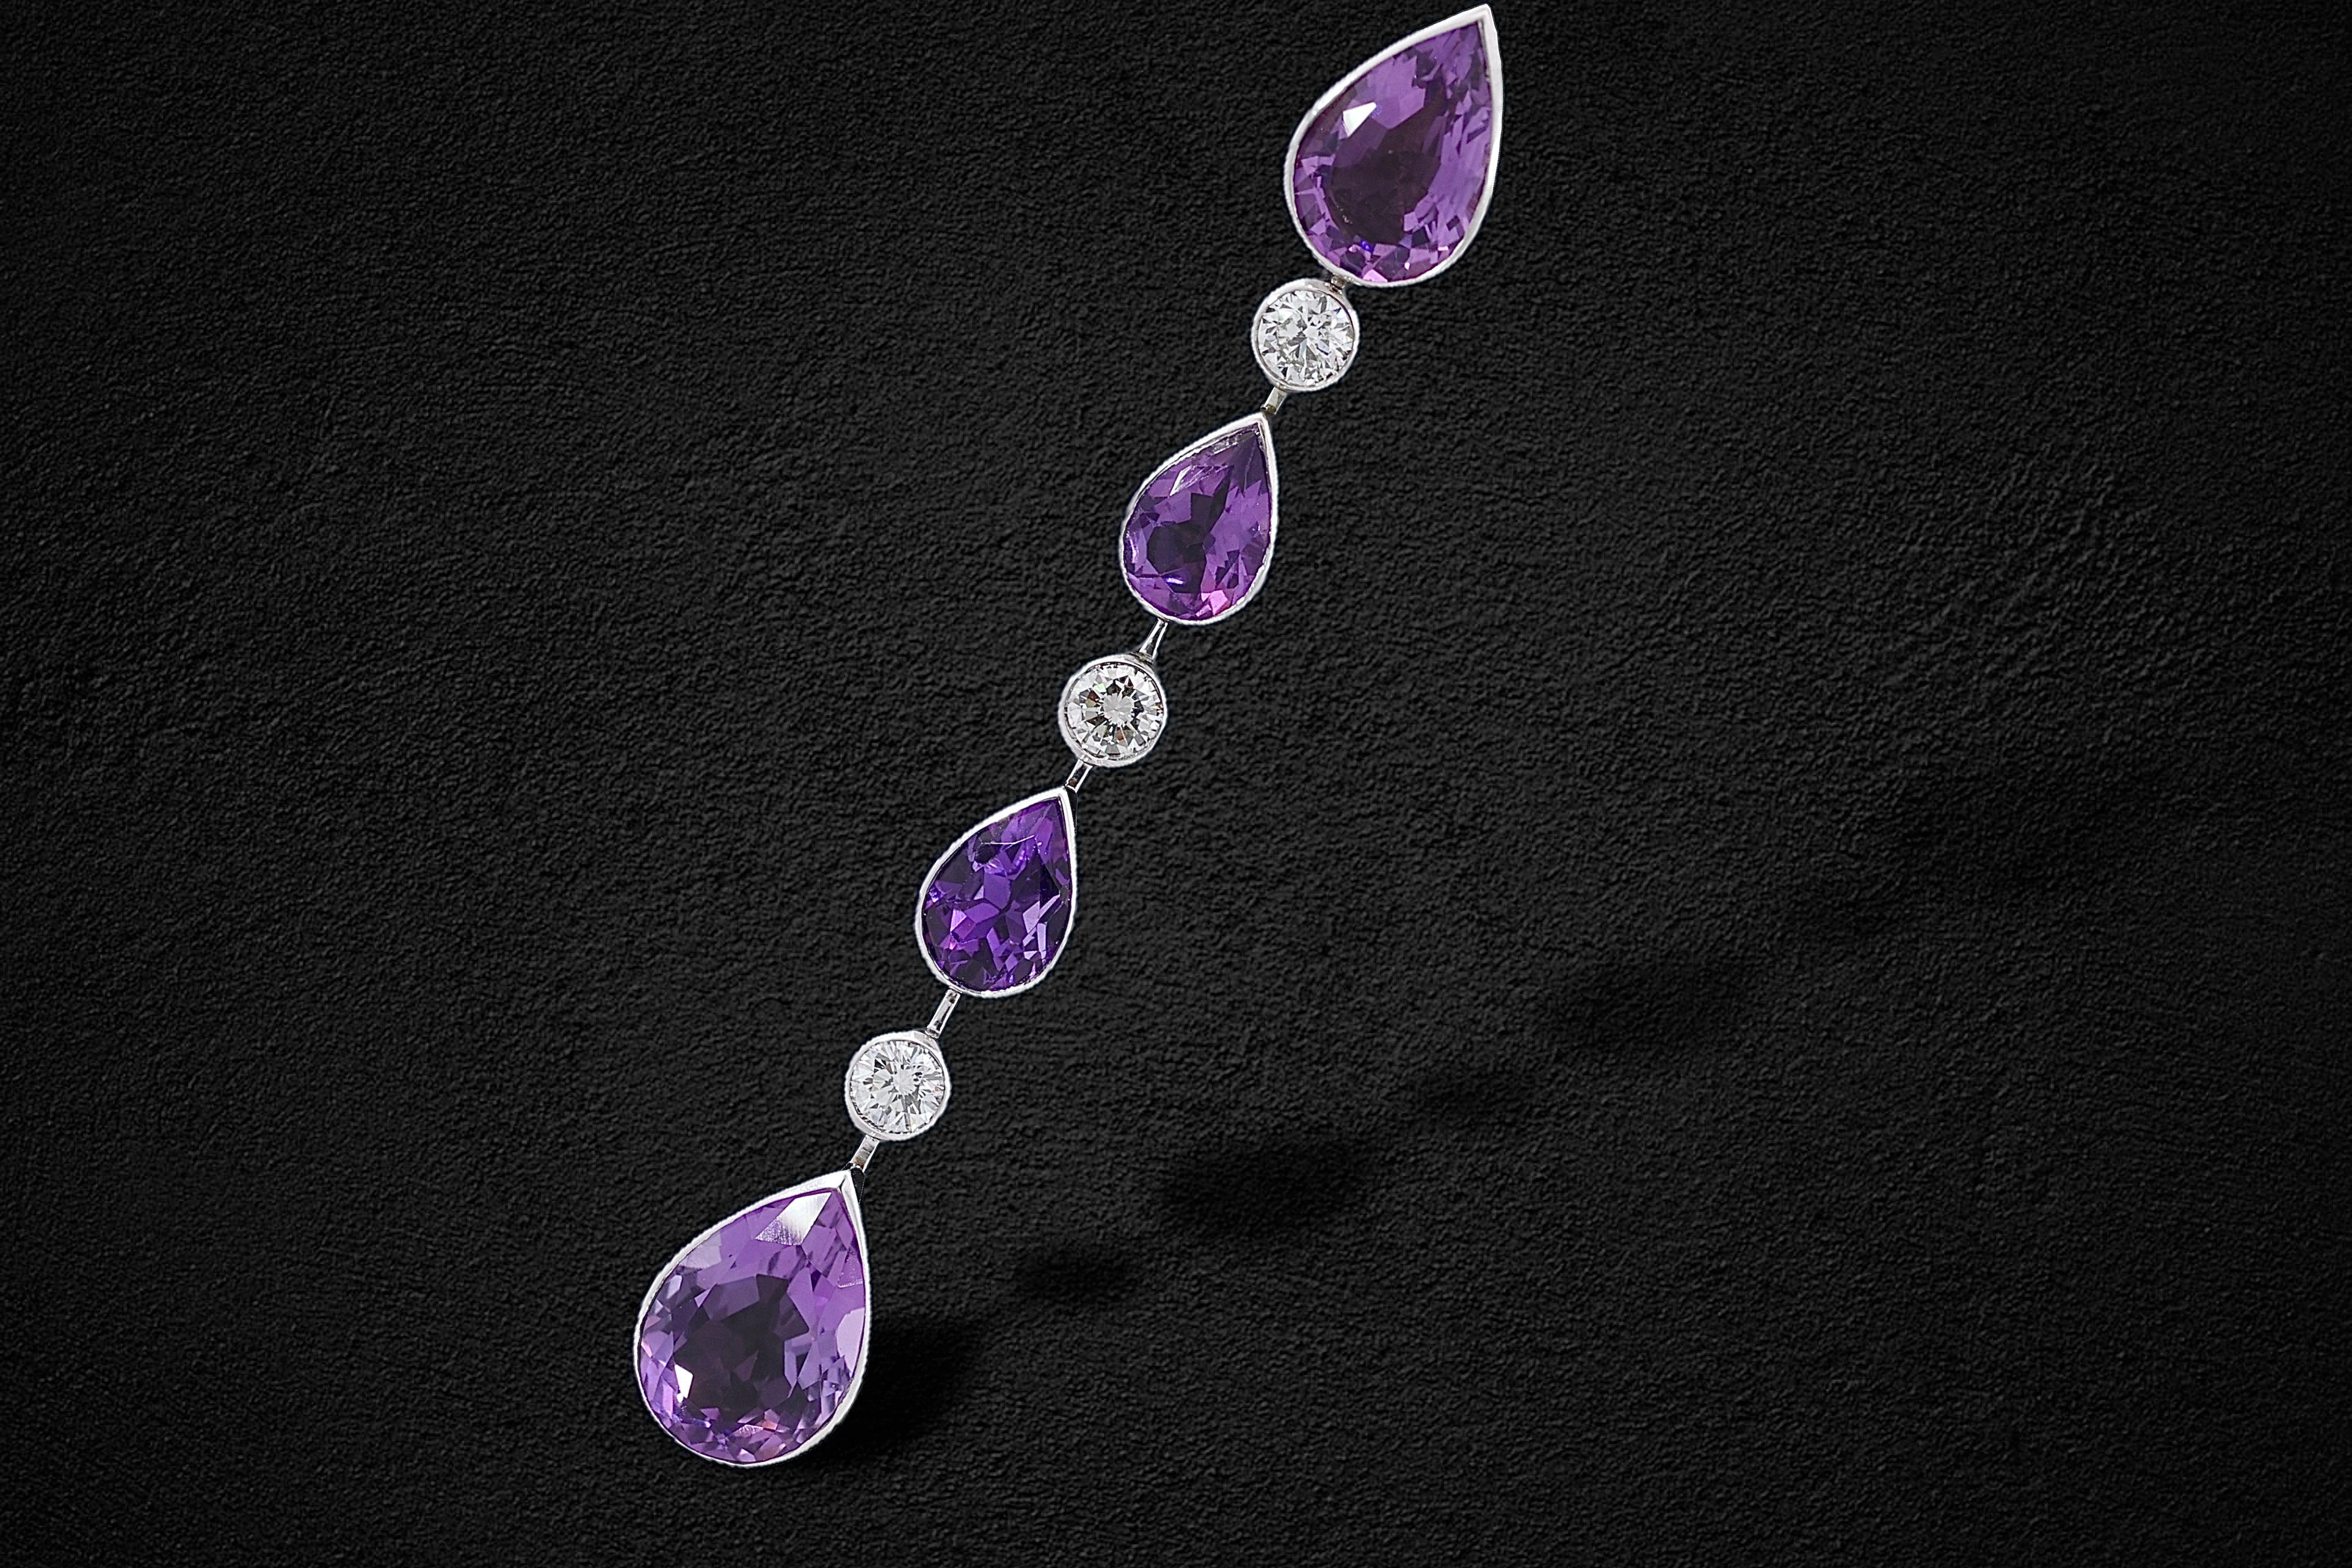 18 Kt White Gold Earrings with 18.43ct Amethyst & 1.55ct Brilliant Cut Diamonds For Sale 3